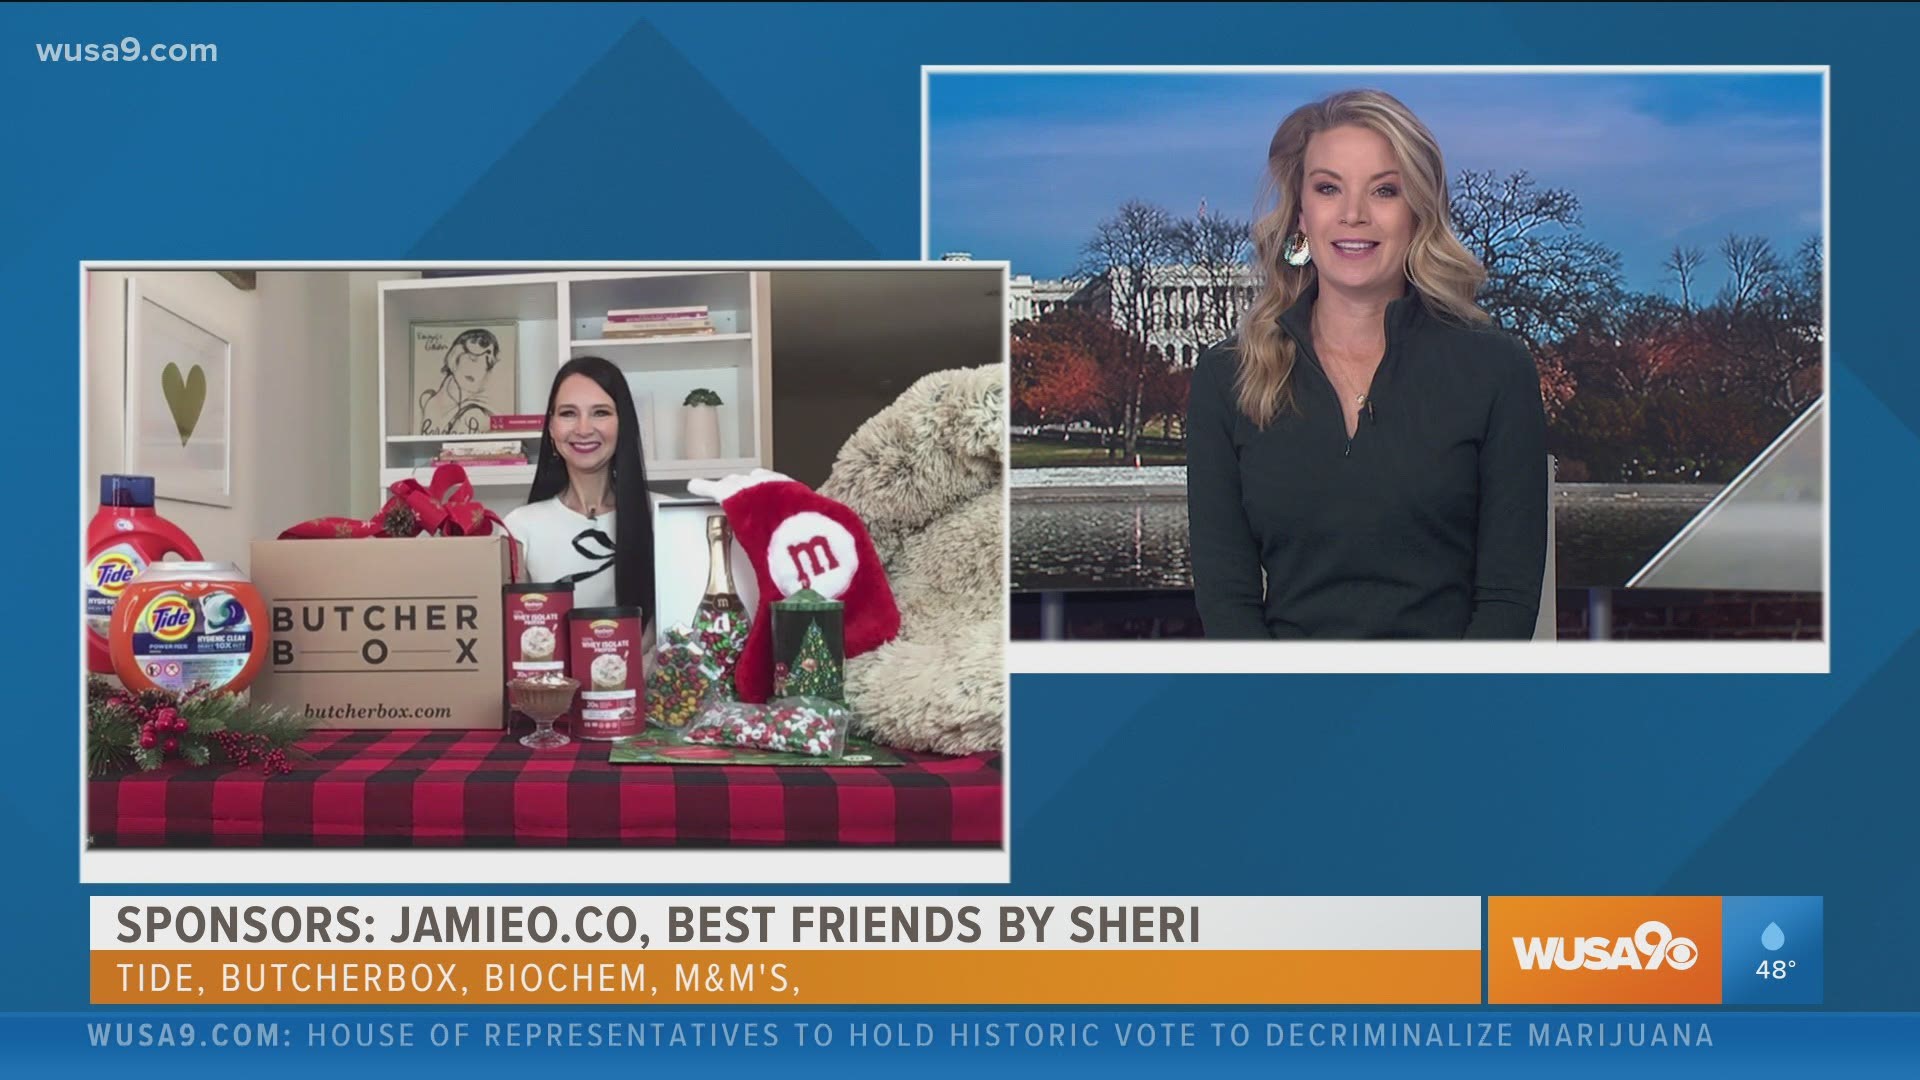 Kristen got a little "Holiday 101" with lifestyle expert Jamie O'Donnell. See what folks are buying, shipping, making, and gifting this year. Sponsored by Jamieo.co